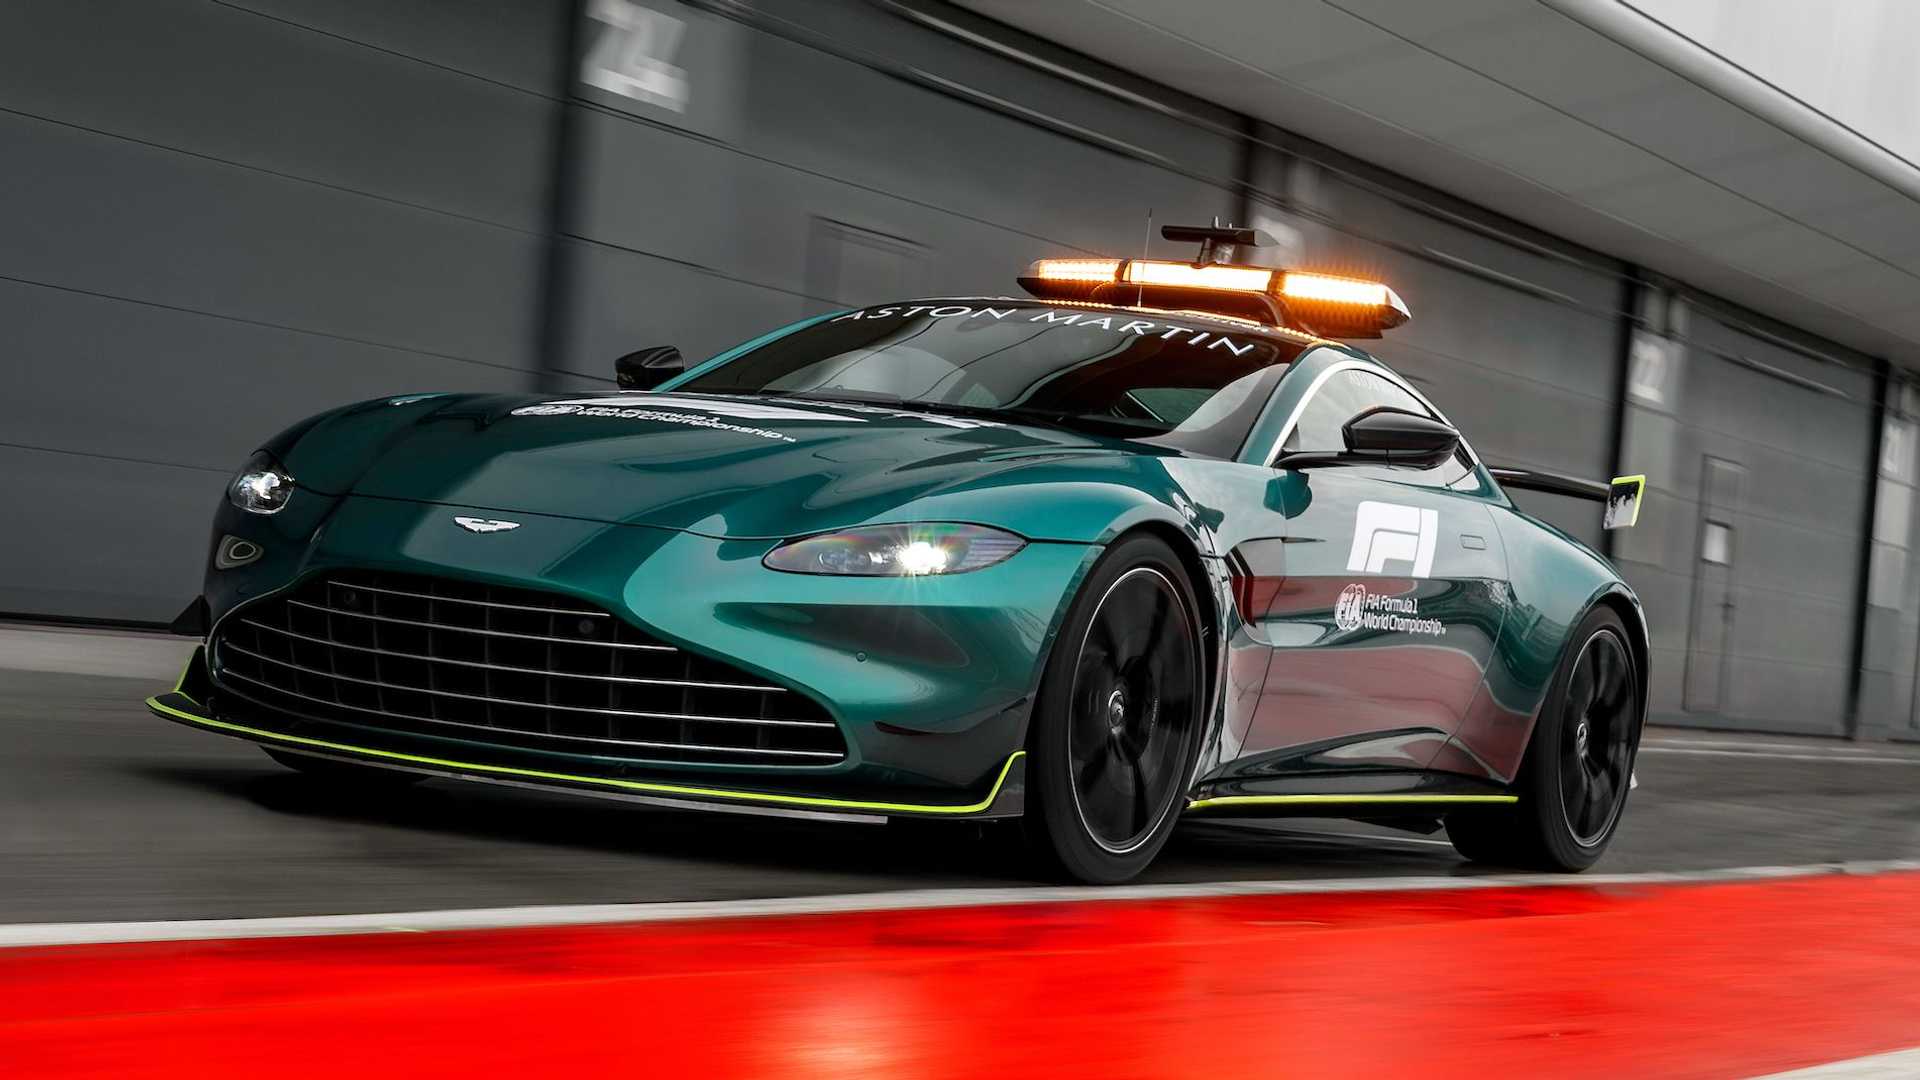 official-formula-1-aston-martin-safety-and-medical-cars-9.jpg